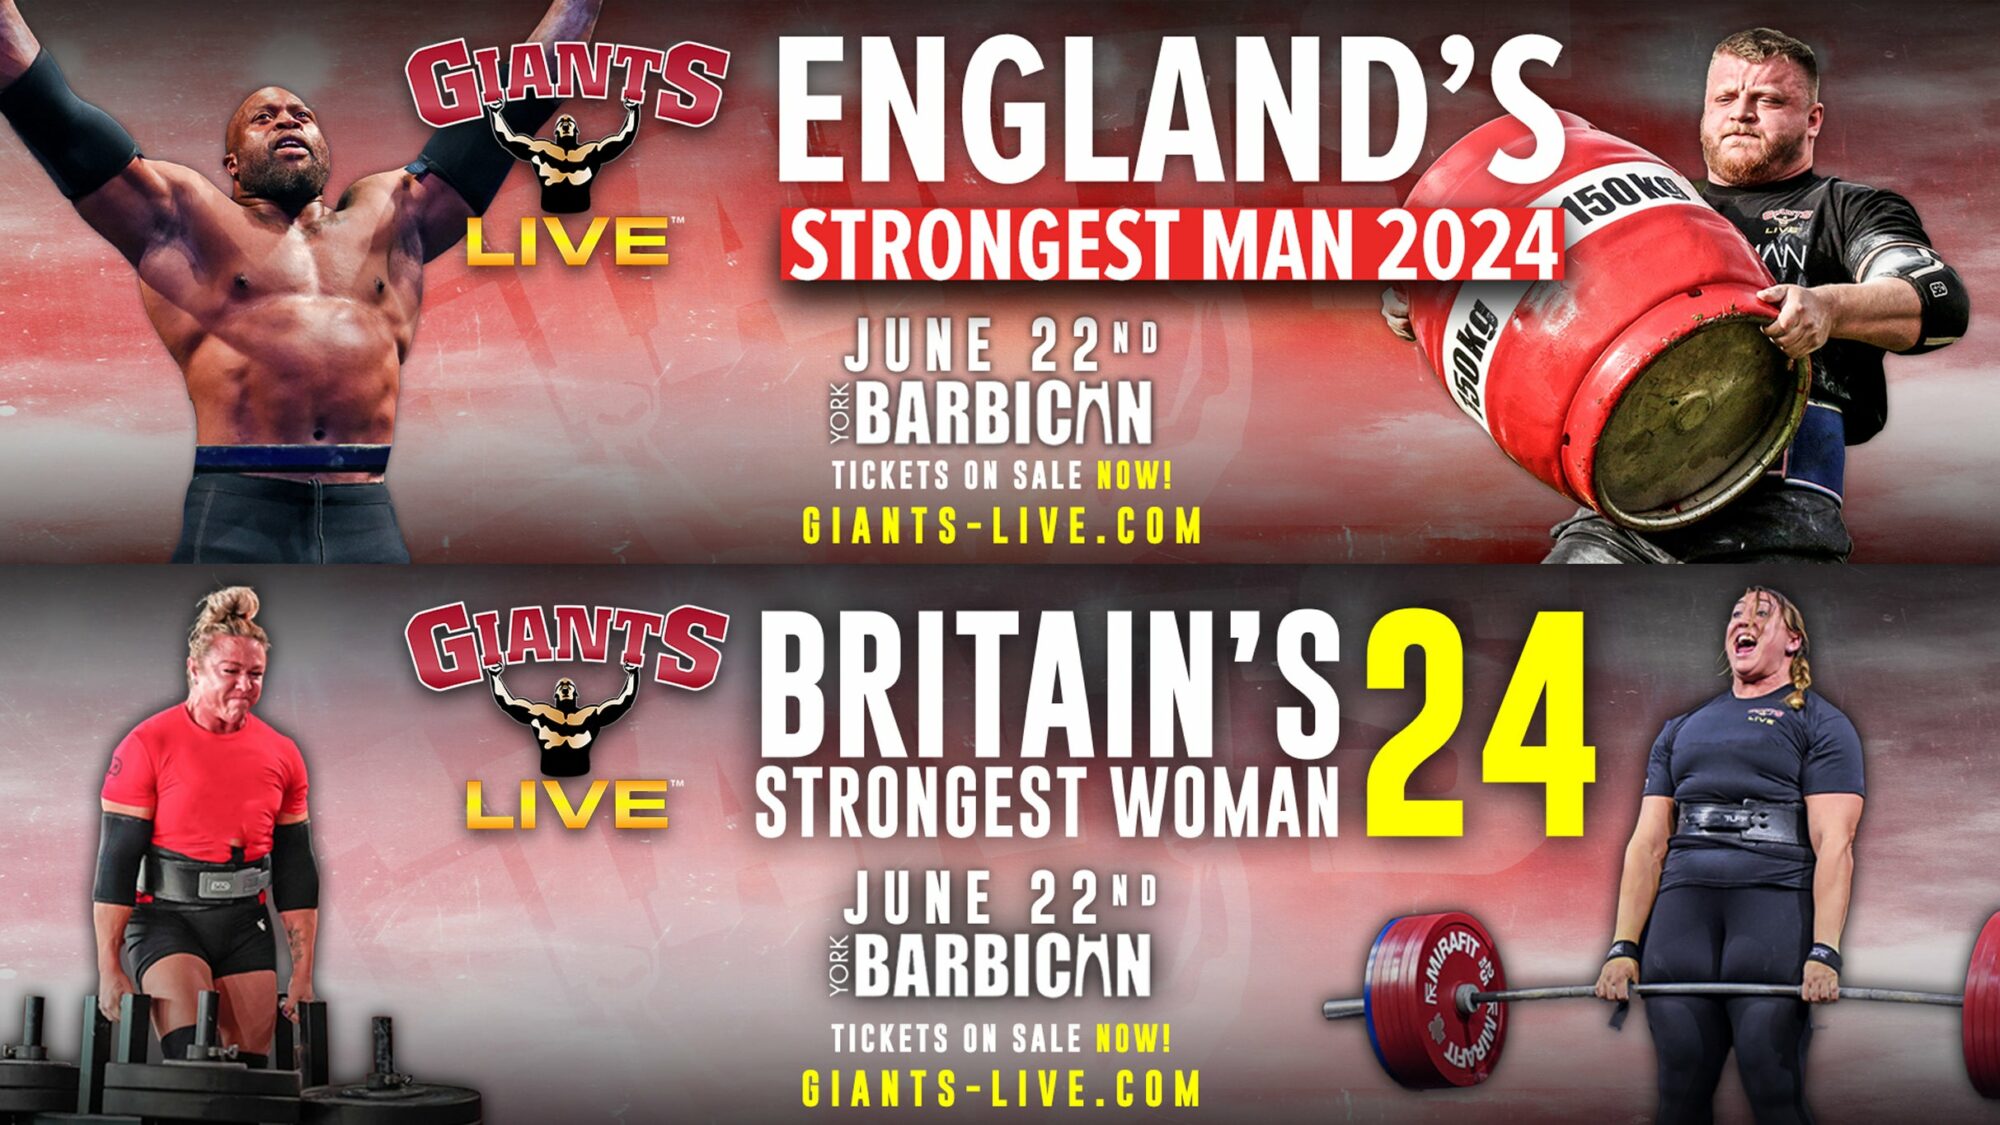 Image name Englands Strongest Man Britains Strongest Woman All Day Ticket at York Barbican York the 9 image from the post England's Strongest Man & Britain's Strongest Woman - All Day Ticket at York Barbican, York in Yorkshire.com.